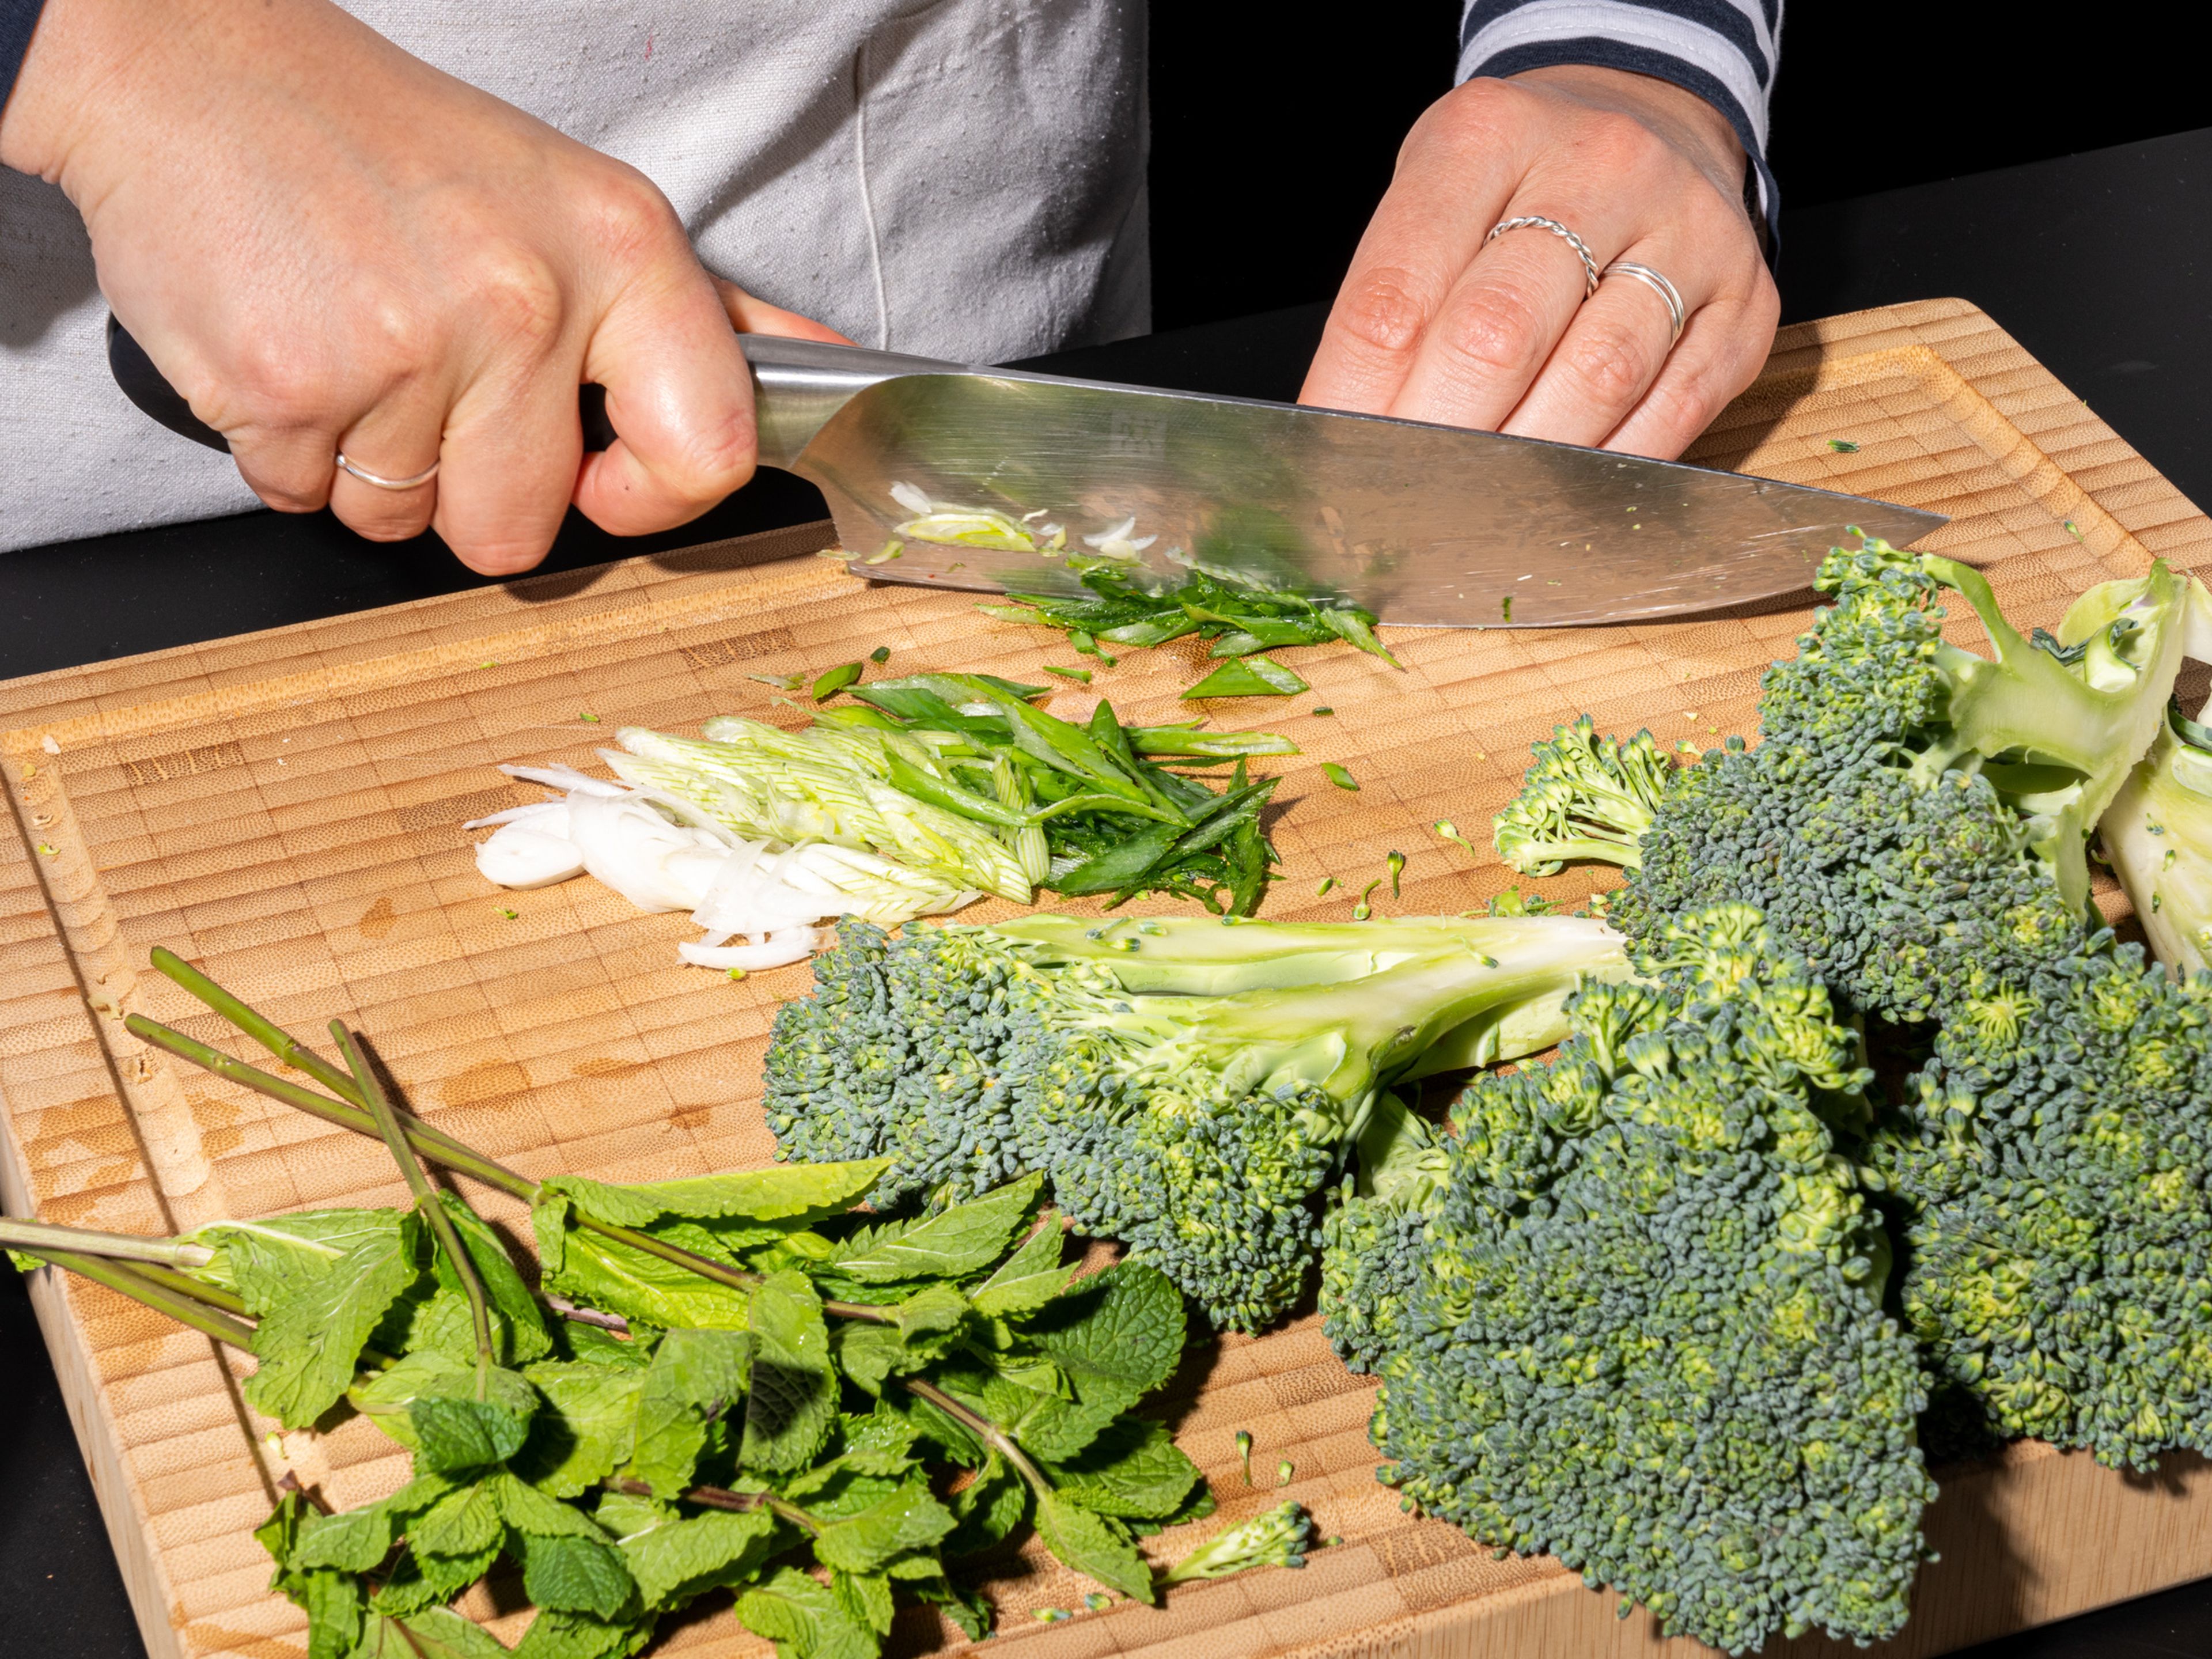 Preheat the oven or grill to 200°C/390°F. Slice off the bottom of the broccoli stem, then use a vegetable peeler to peel the woodier skin off the stem. Slice broccoli down the middle, then cut each half lengthwise into three pieces, so you have 6 "wedges". For the glaze, grate ginger and squeeze lime juice into a bowl with the hoisin sauce.  Mix well. Thinly slice scallions at an angle. Set aside.